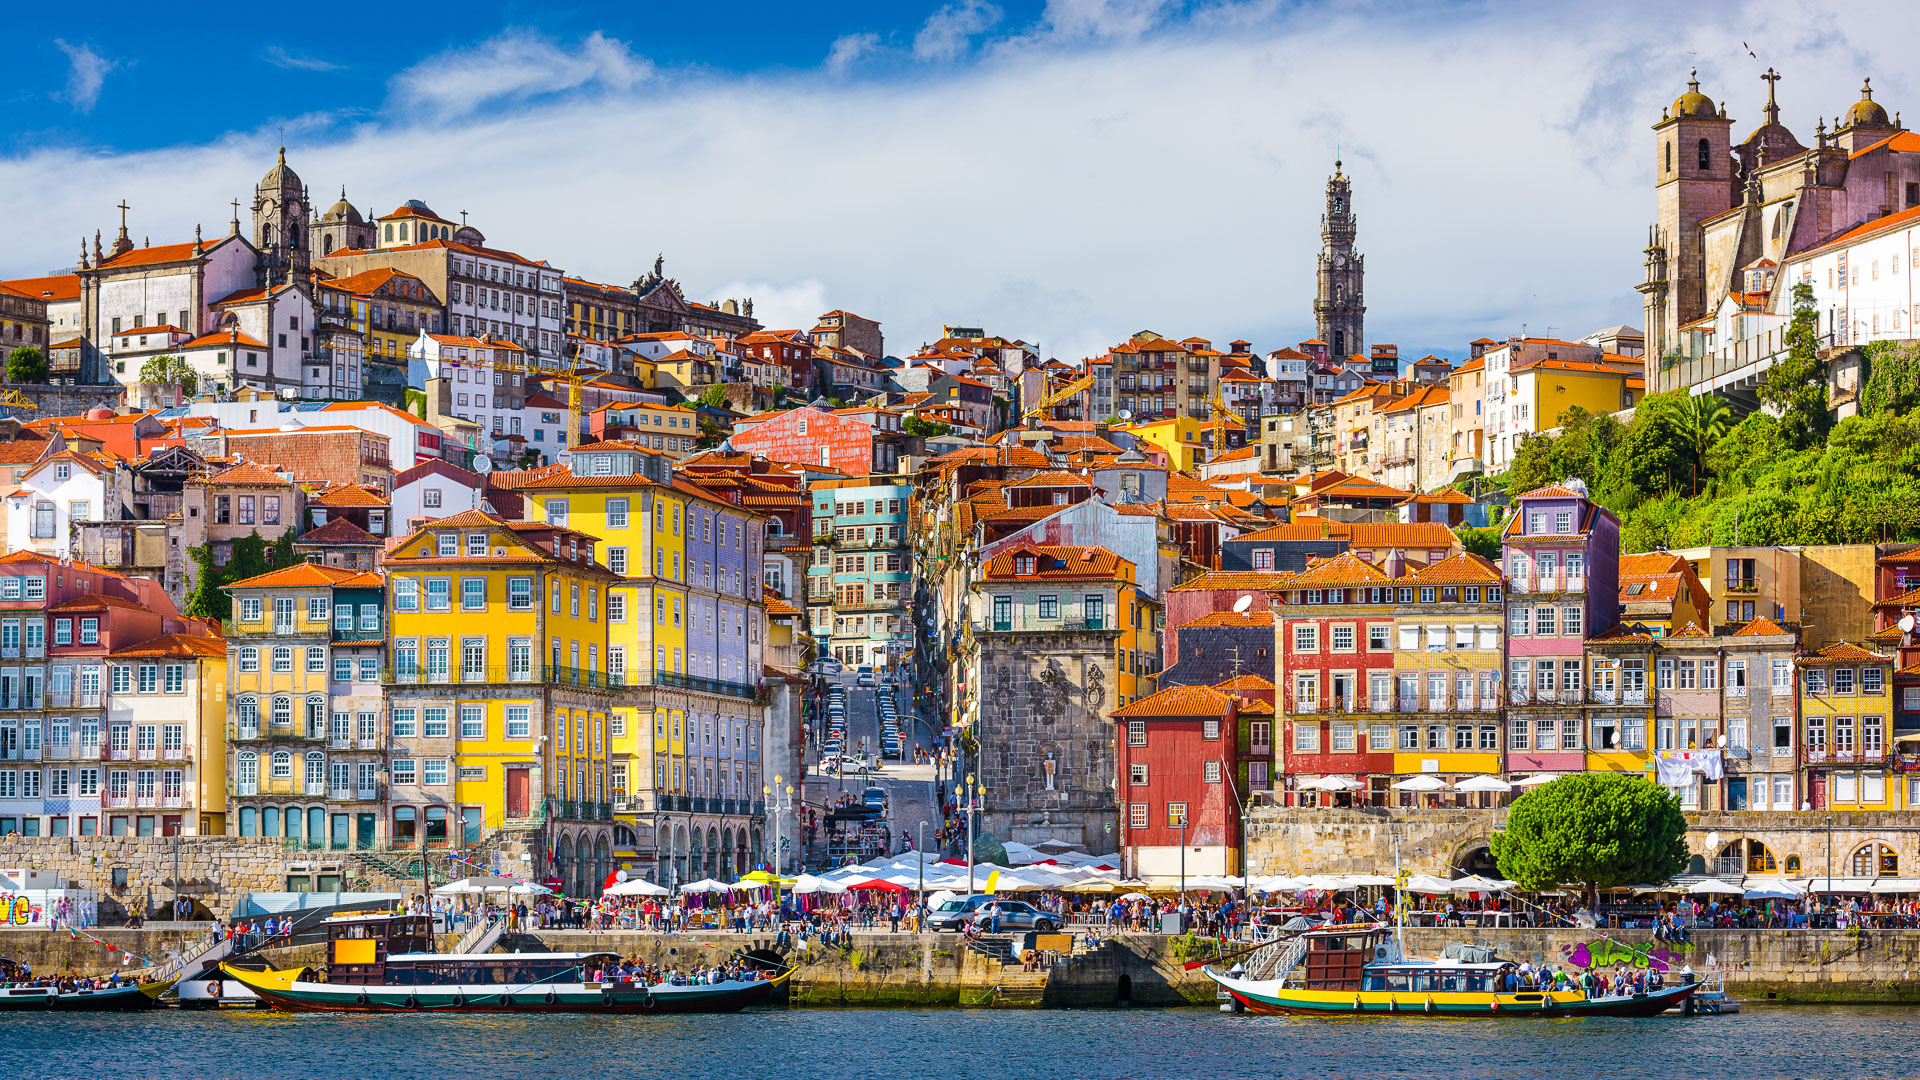 <ul> <li><strong>Average home price:</strong> $635,650</li> </ul> <p>Porto, a UNESCO World Heritage Site on the banks of the Douro River, is another of Portugal's significant historical cities. Visitors can wander through the narrow streets of its vibrant Ribeira district, taking in the sights and stories of its historic center. Don't miss the chance to visit the city's iconic São Francisco Church, a gothic gem with a breathtaking Baroque interior.</p> <p>After seeing the city on foot, consider spending a day on the water, where you can take advantage of one of the historic cruises offered to tourists. Quaint but well-maintained boats move slowly along the banks as the city drifts by, letting you experience the view from the slow-moving, deep-blue waters of the Douro River. </p> <p>For those who drink, no visit to Porto would be complete without a trip to the cellars where world-renowned Port wine is aged to perfection.</p>